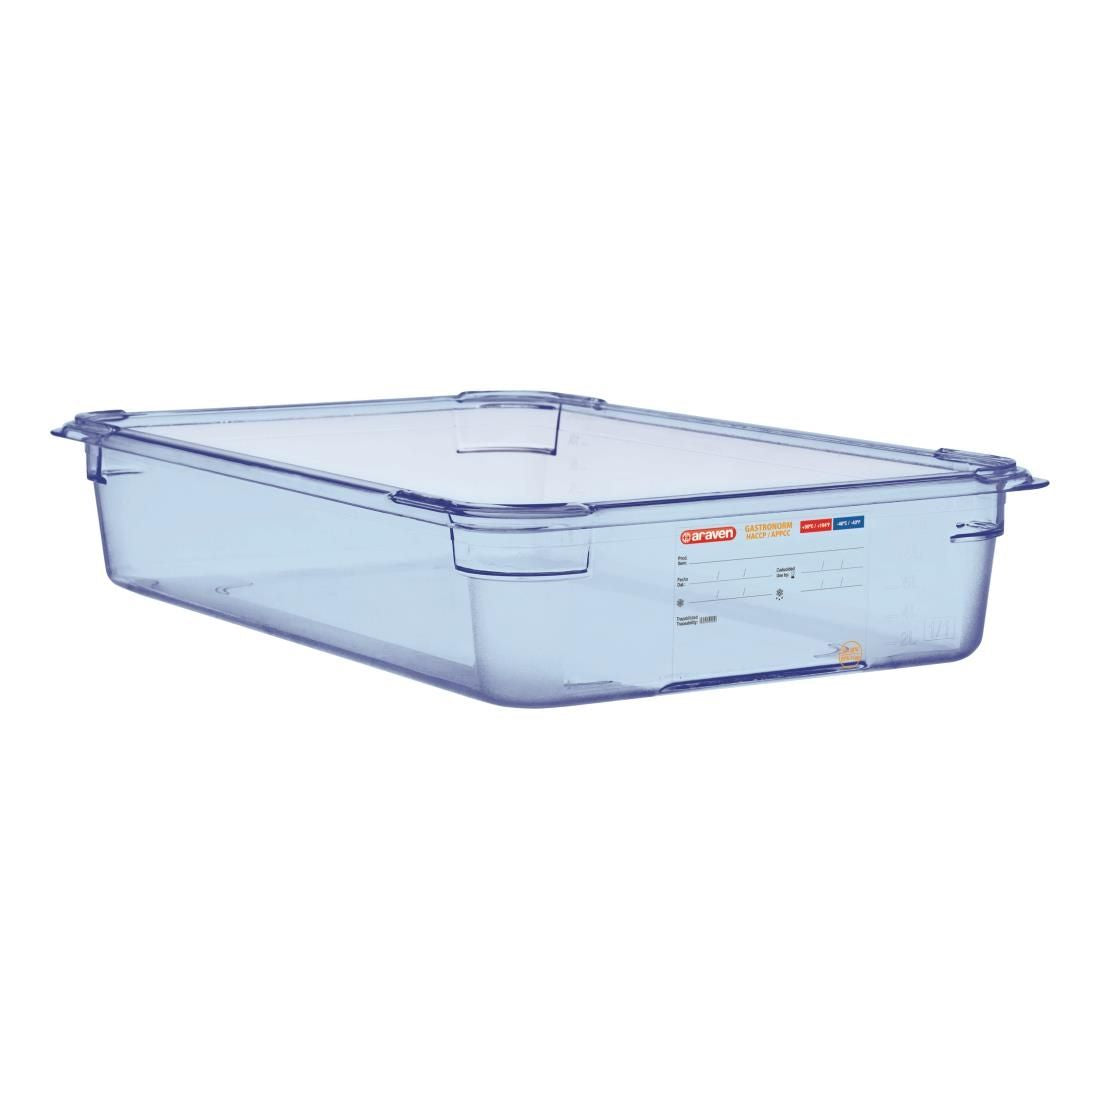 GP589 Araven ABS Food Storage Container Blue GN 1/1 100mm JD Catering Equipment Solutions Ltd